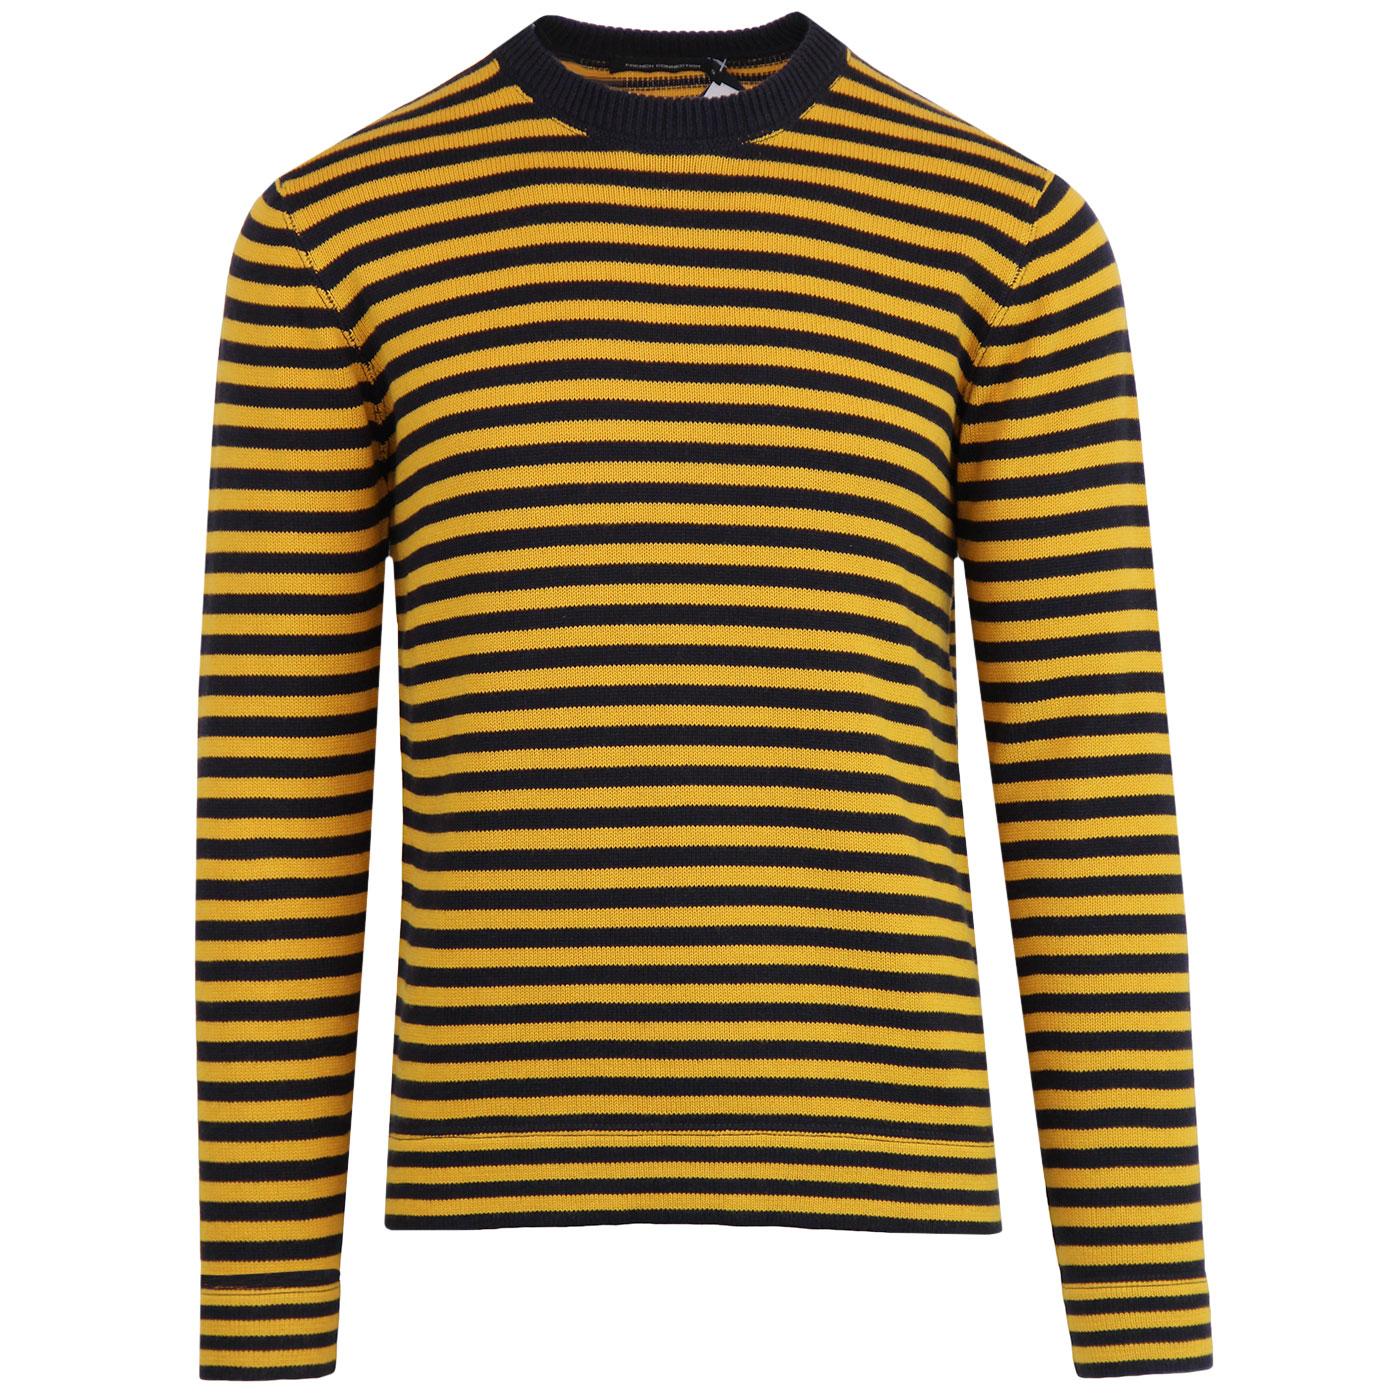 FRENCH CONNECTION 60s Mod Knit Stripe Jumper (Y/N)